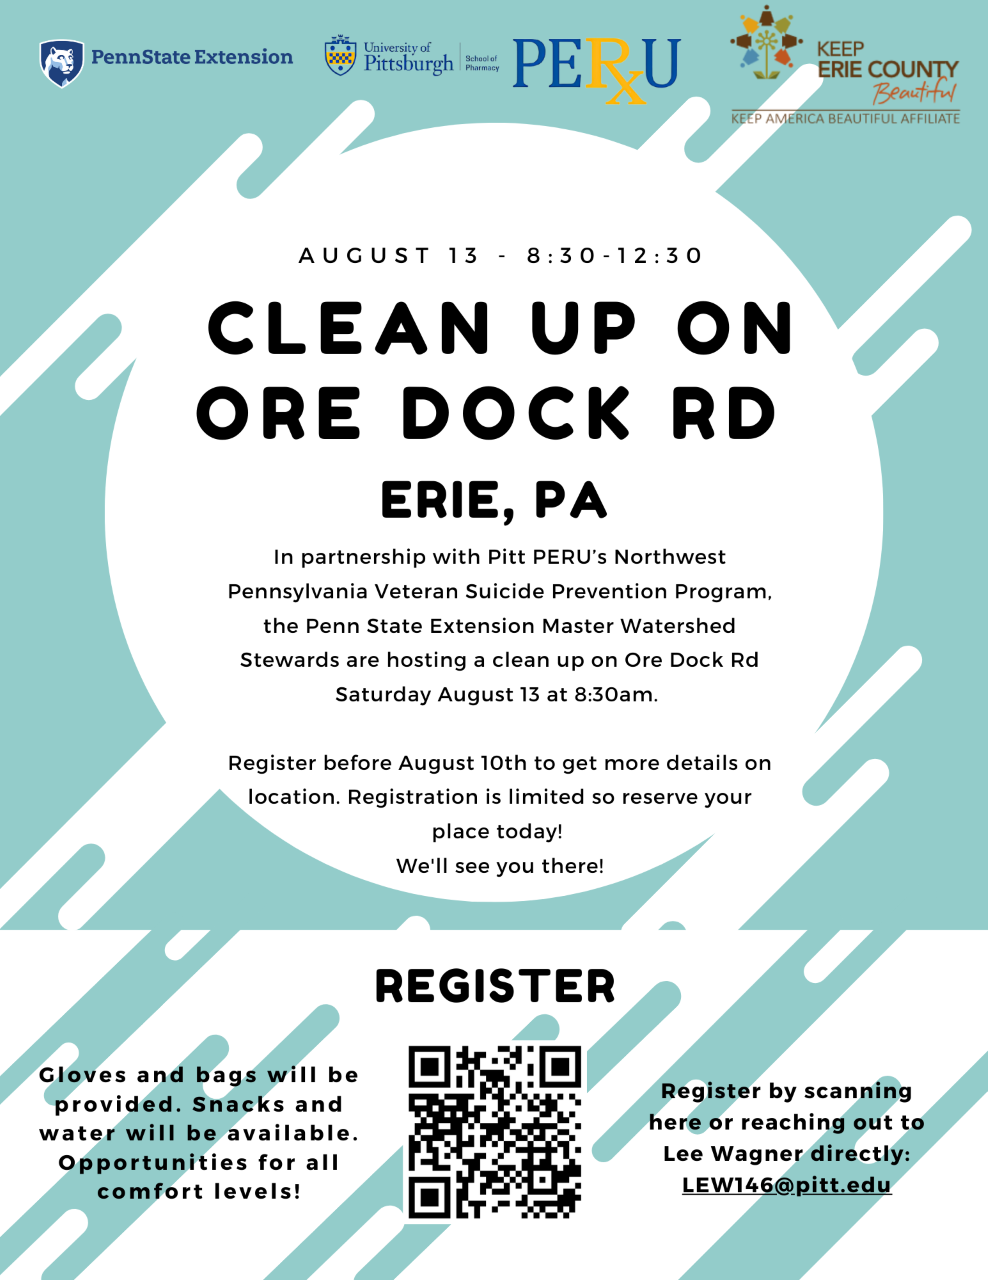 August 13 - Erie Clean Up